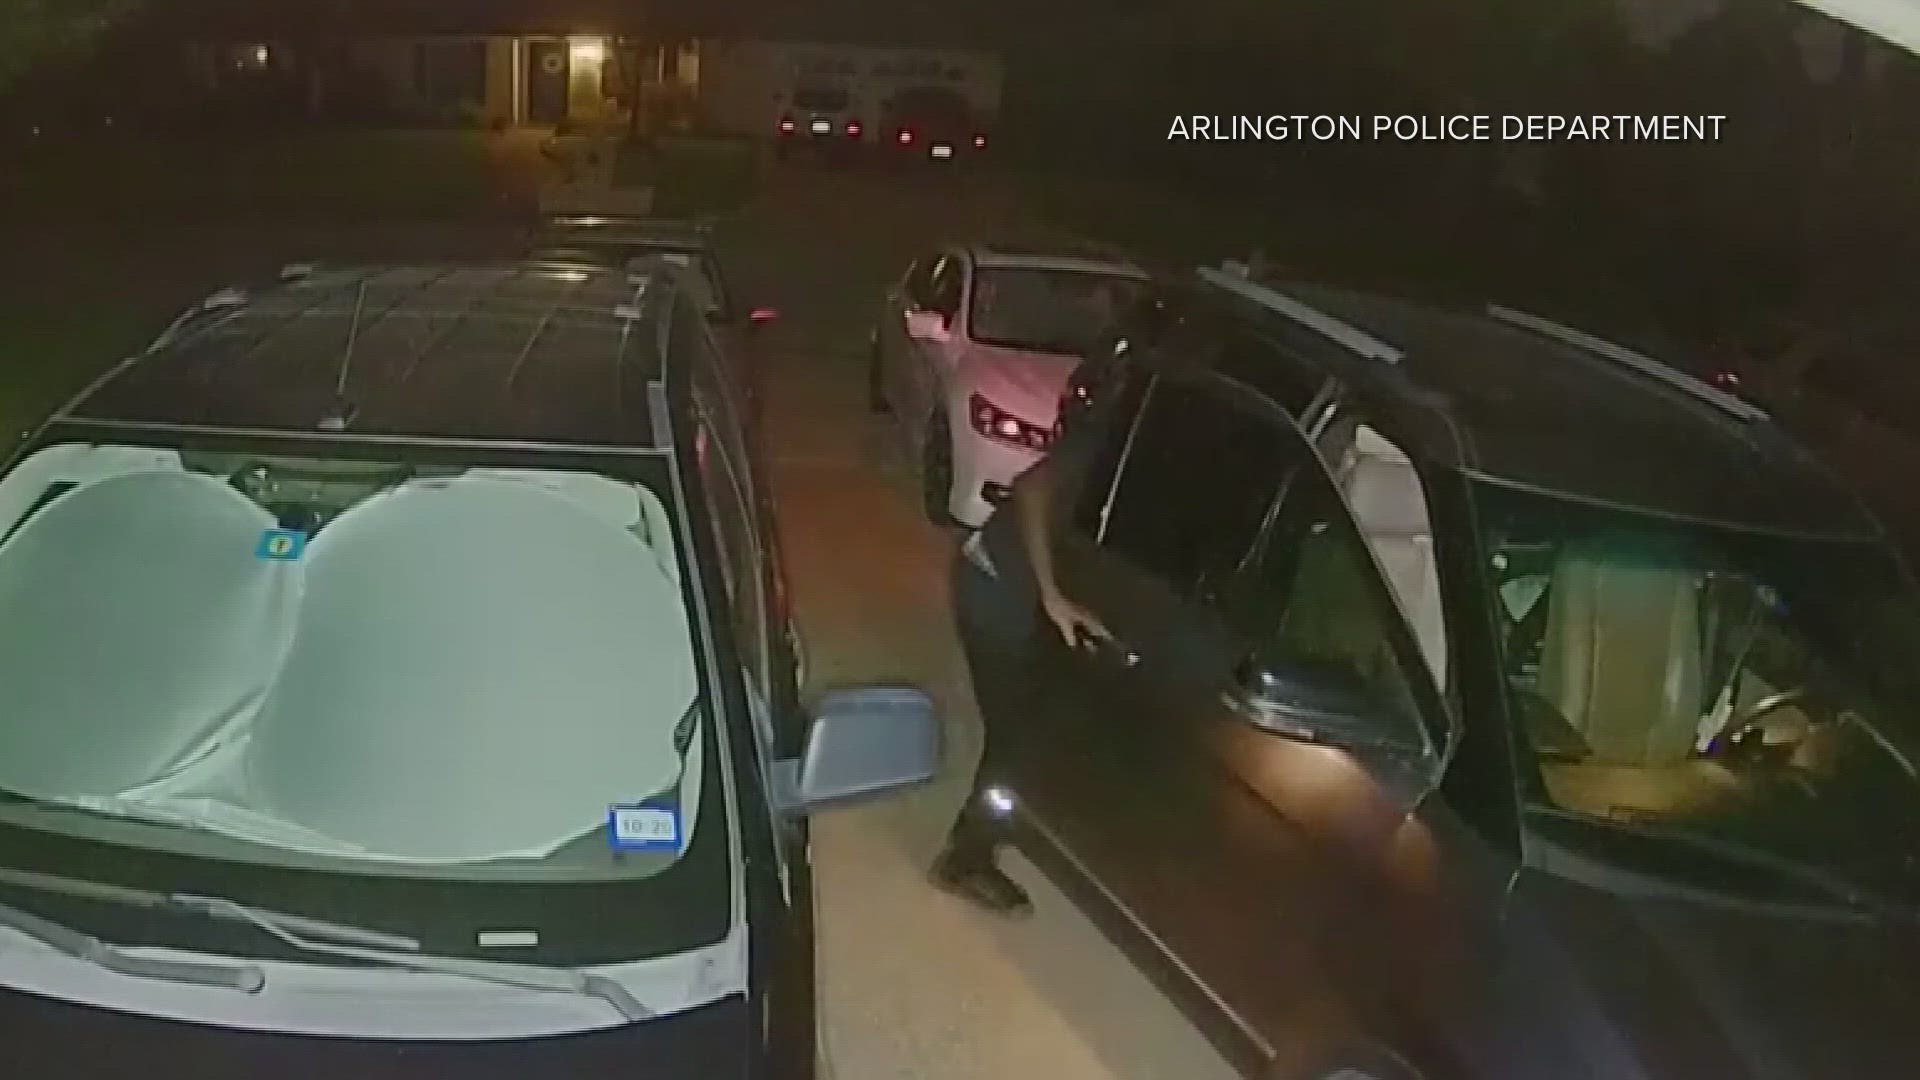 Arlington police department has launched a new program they say will use surveillance video to improve community safety.